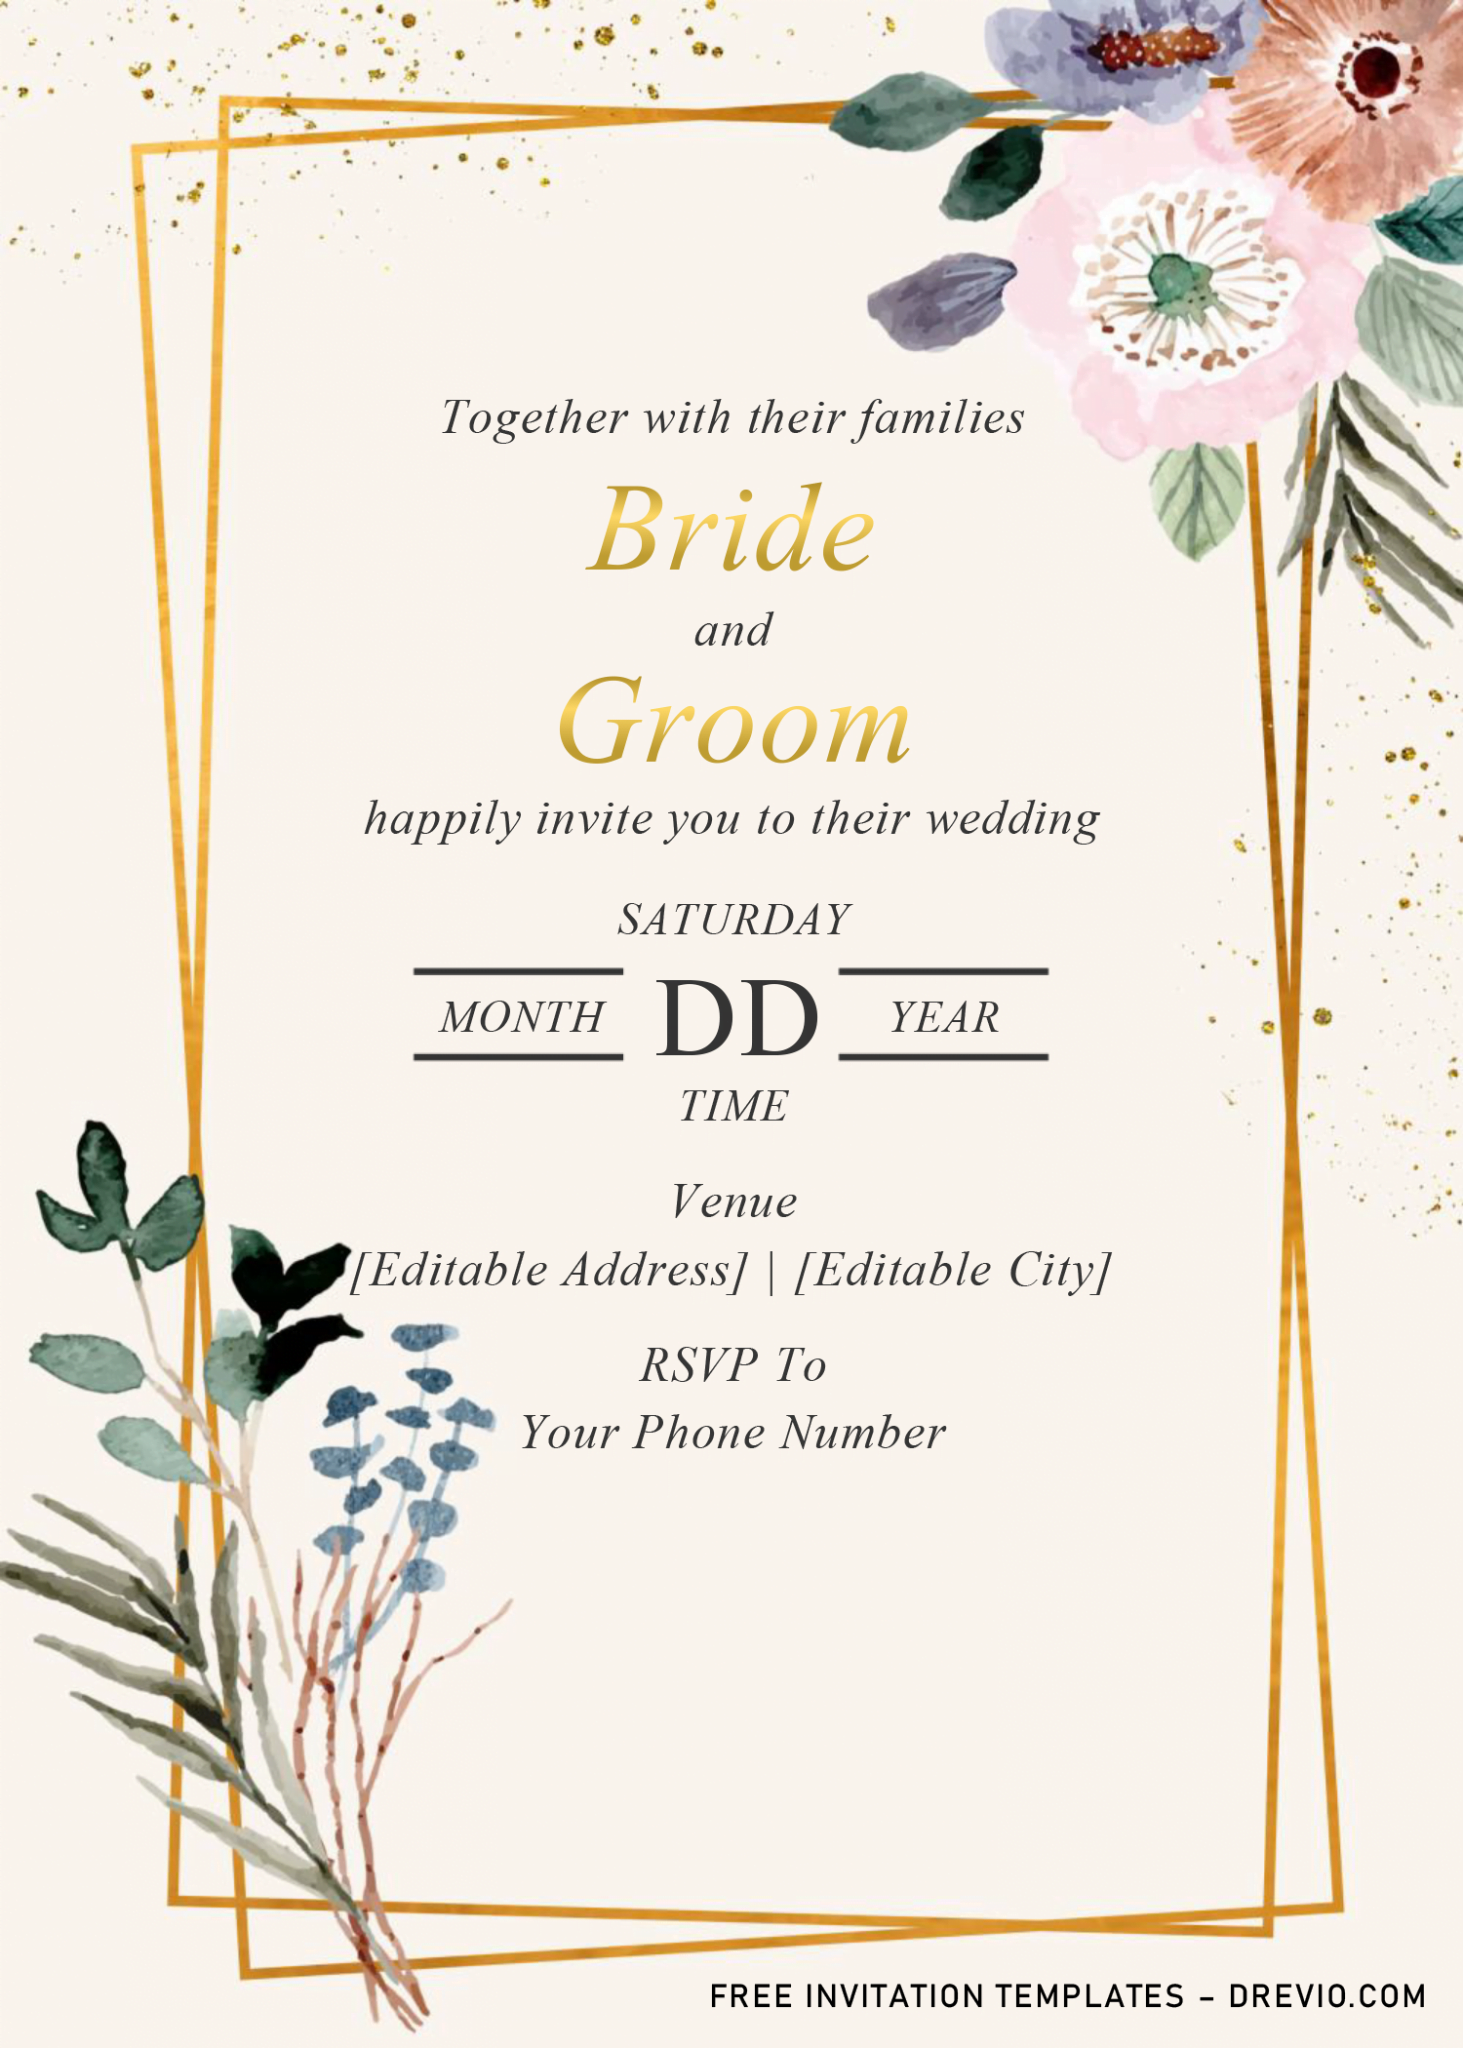 Floral And Geometric Invitation Templates – Editable With MS Word